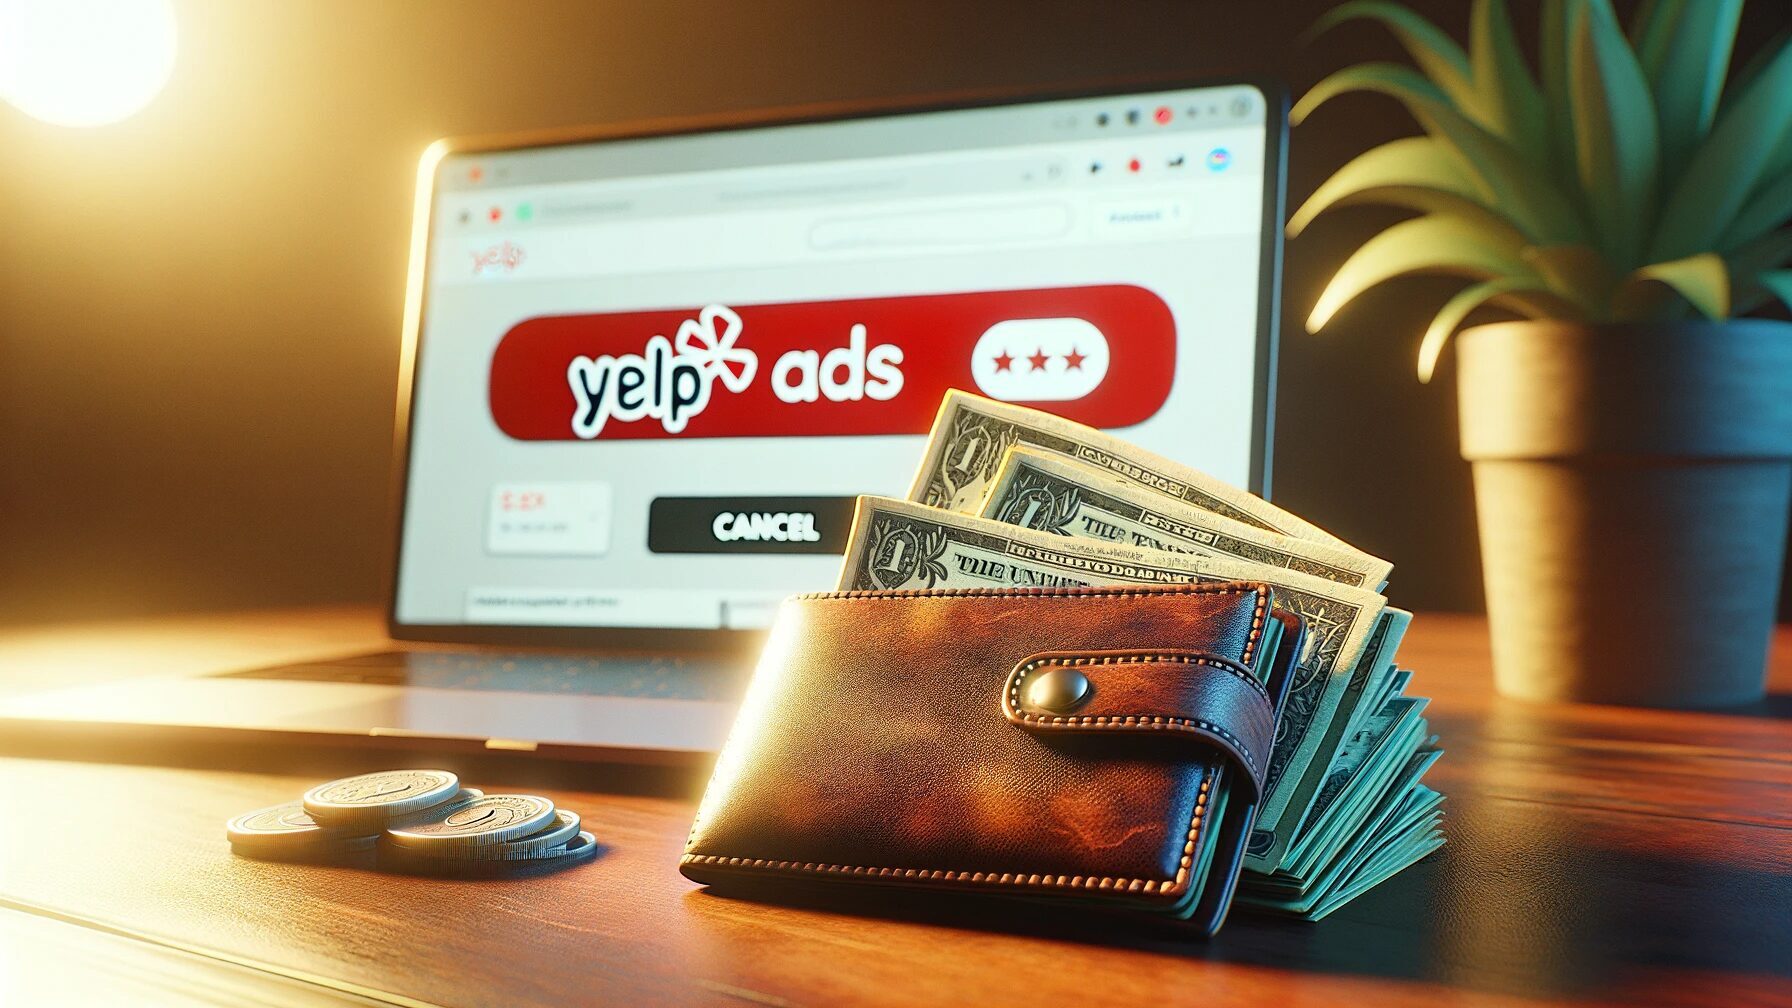 How to Cancel Yelp Ads